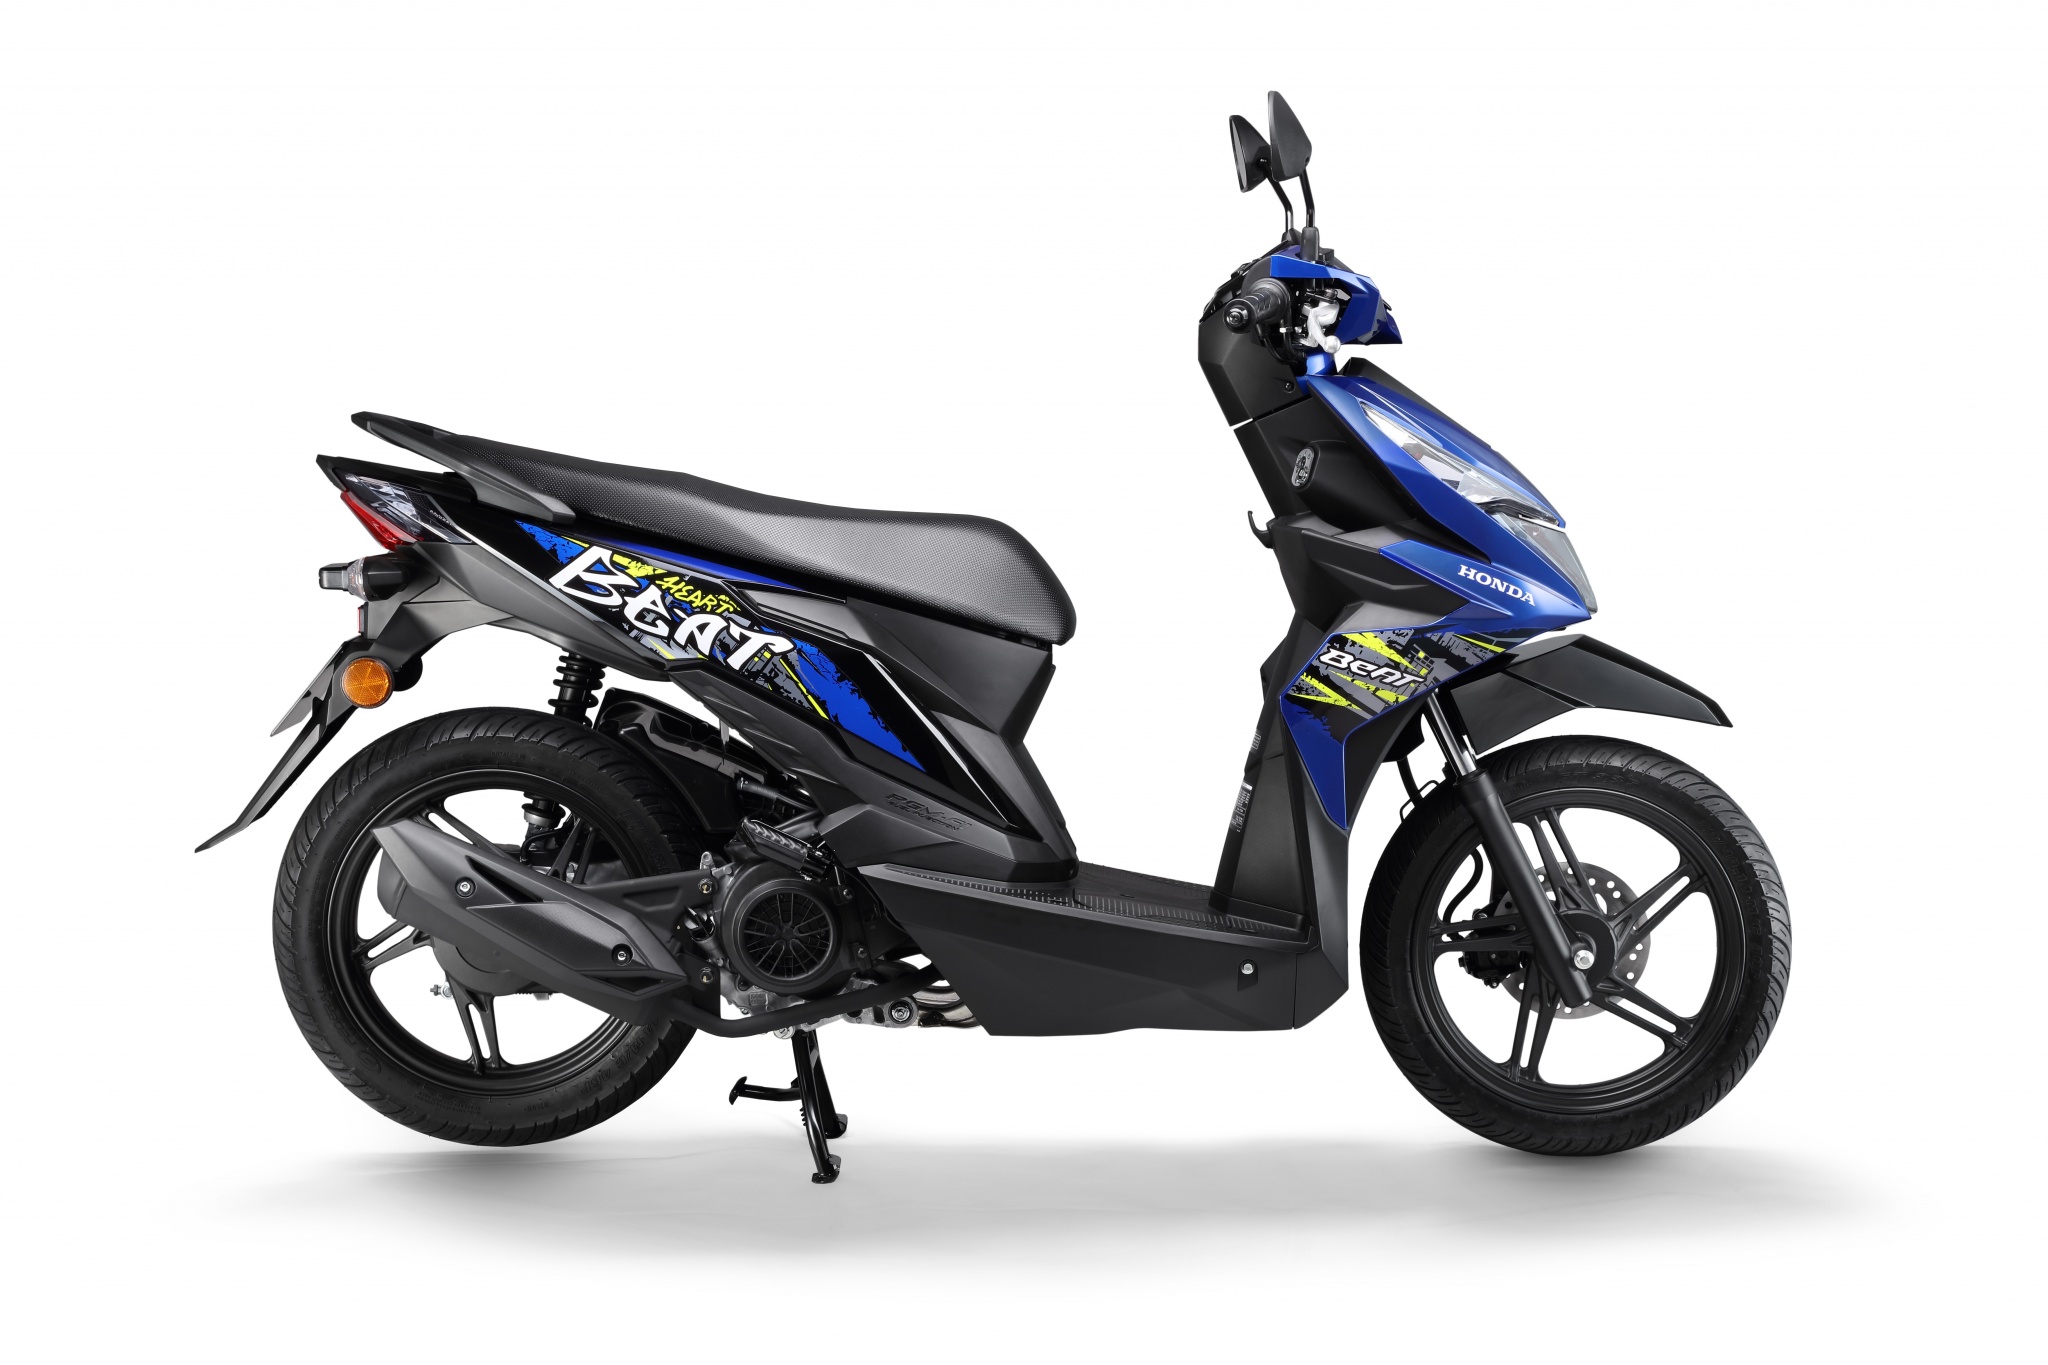 2018 Honda BeAT scooter now on sale - RM5,724